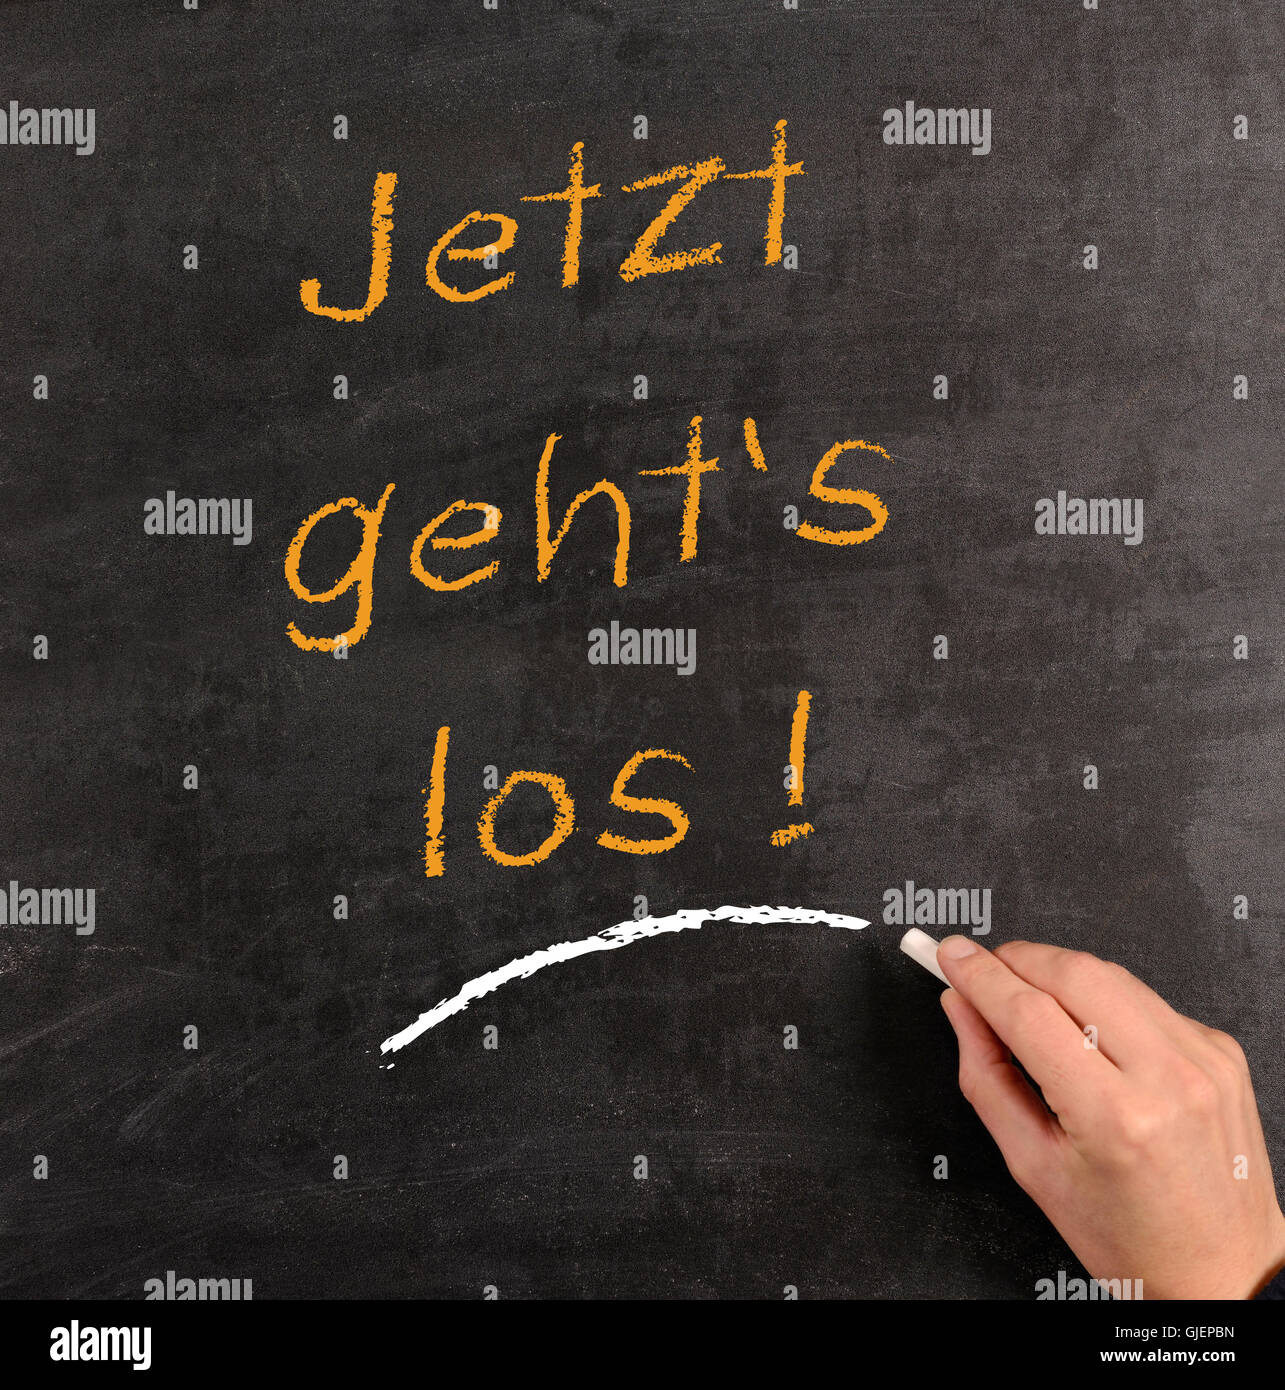 Hand writing with chalk on a blackboard the German words 'Start now!' Stock Photo